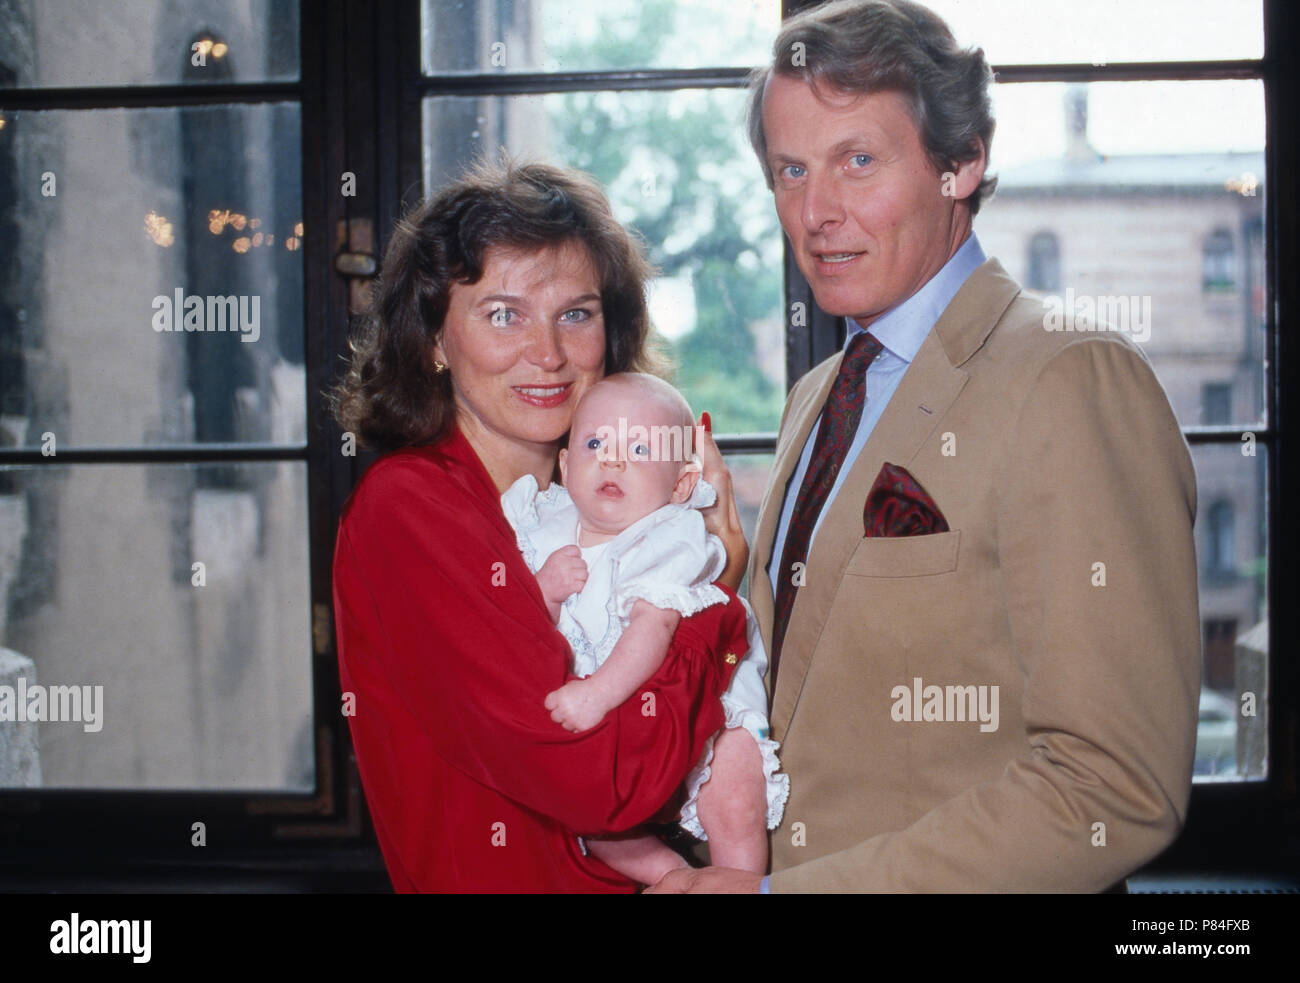 Anton Wolfgang Graf von Faber-Castell mit Ehefrau Mary und Baby Katharina  in Stein bei Nürnberg, Deutschland 1988. Anton Wolfgang Count of Faber  Castell with his wife Mary and baby daughter Katharina at